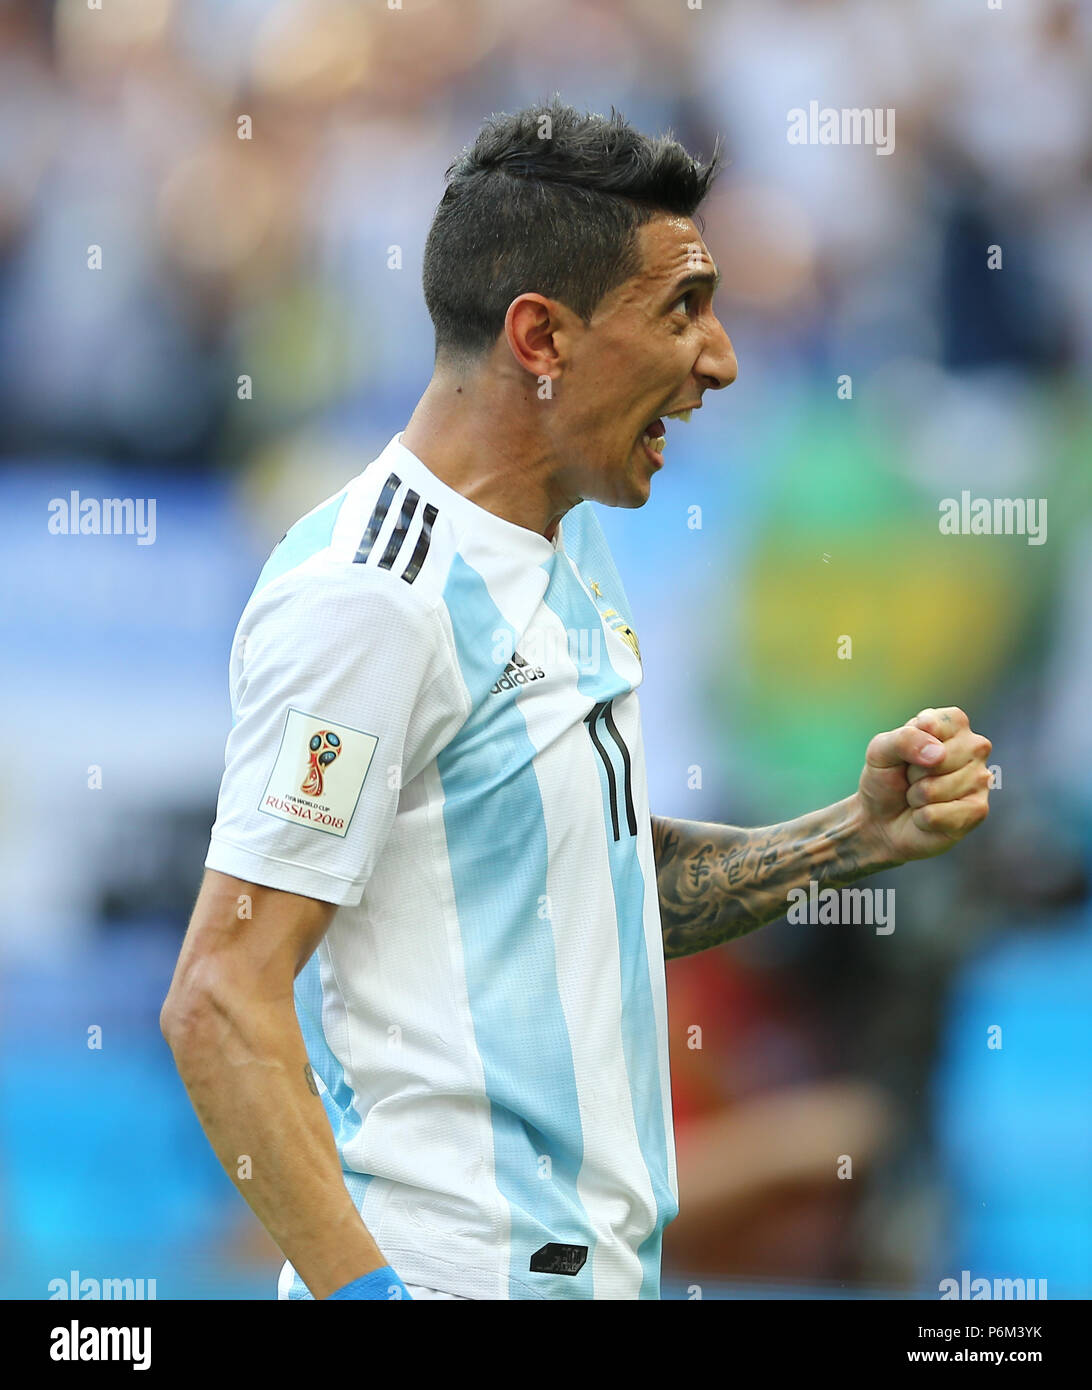 Kazan, Russia, June 30, 2018: Angel DI MARIA gestures after his first goal During the first round of 16 were France and Argentina played out a world cup in which France 4 & Argentina 3  Argentina's campaign came to an end as France made a victory by 4-3.   Seshadri SUKUMAR Credit: Seshadri SUKUMAR/Alamy Live News Stock Photo